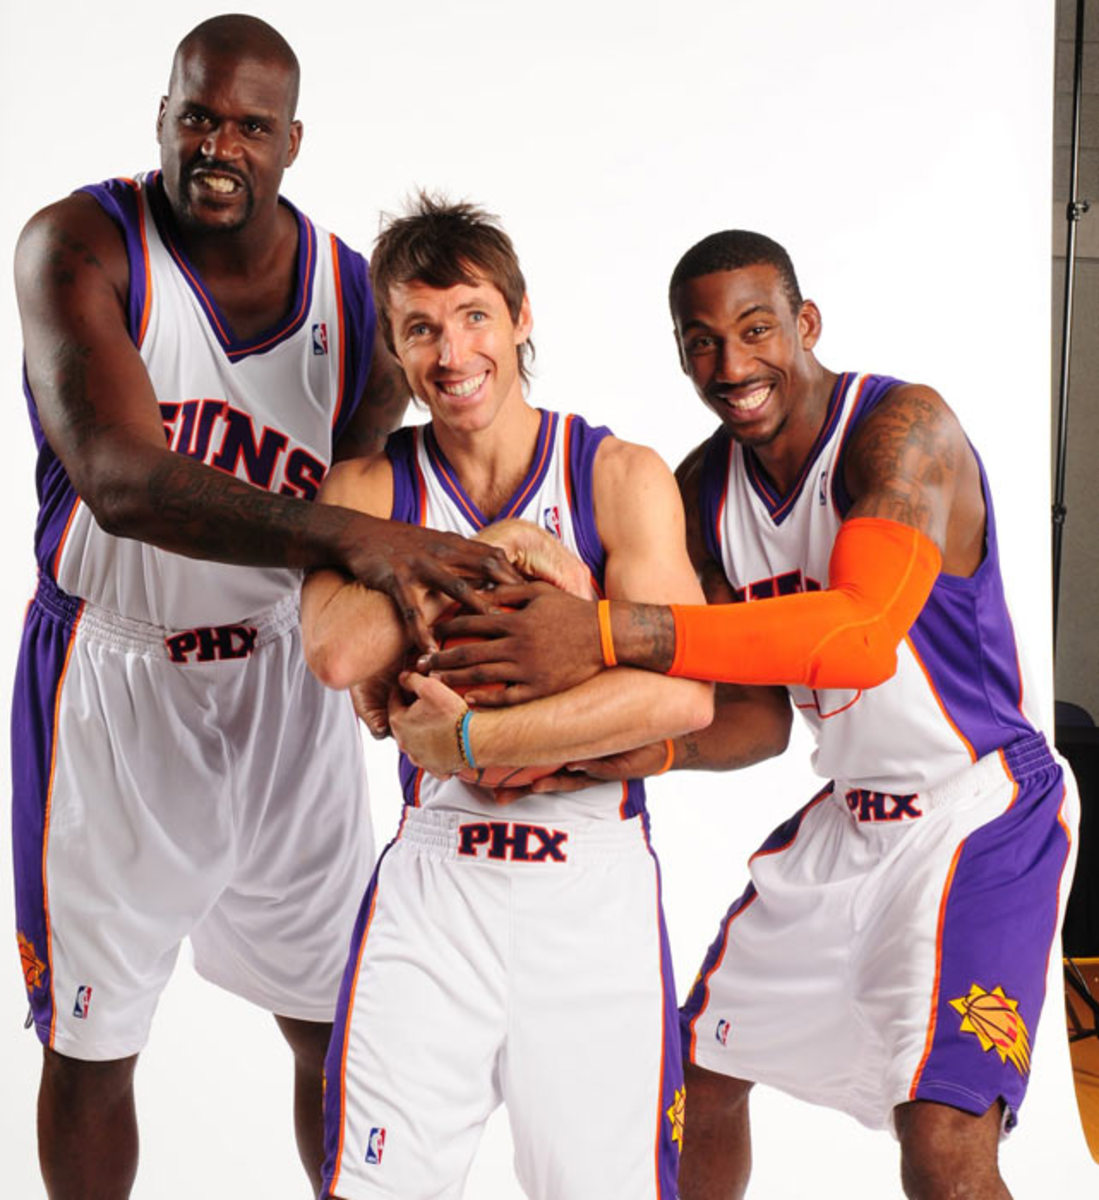 Shaquille O'Neal, Steve Nash and Amare Stoudemire